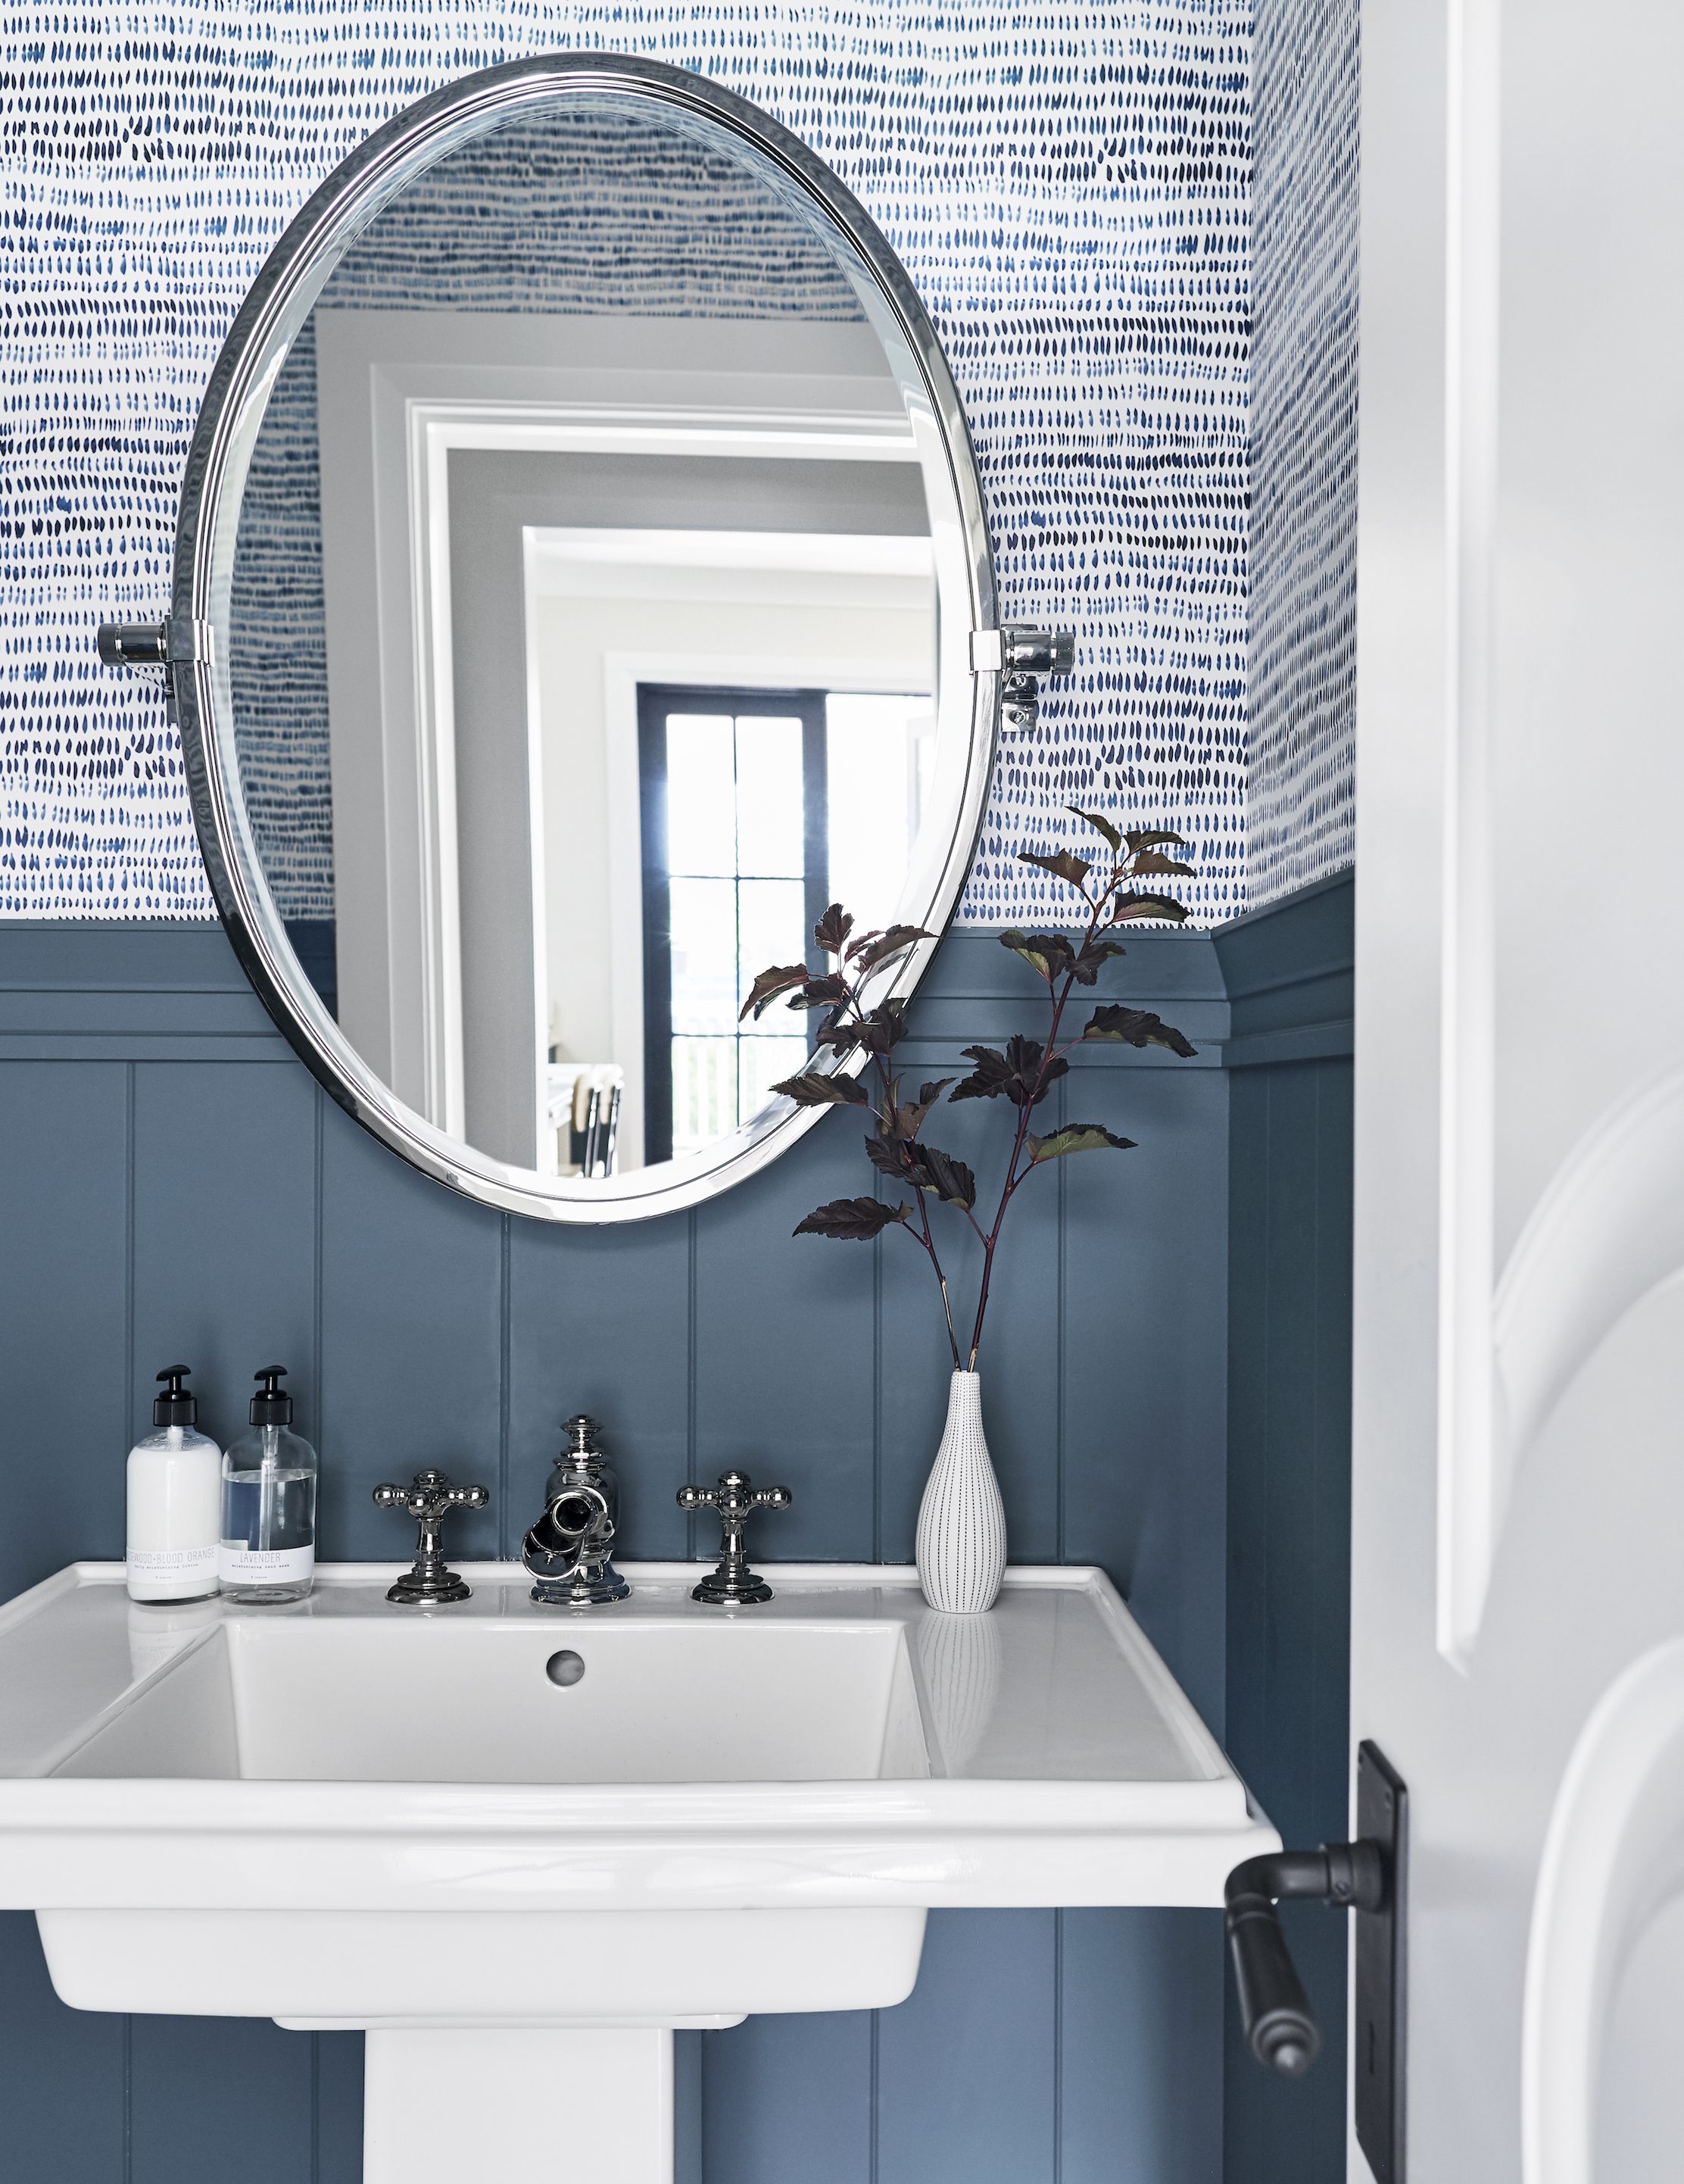 Bathroom Wallpaper That Will Give a New Look to Your Boring Bathroom